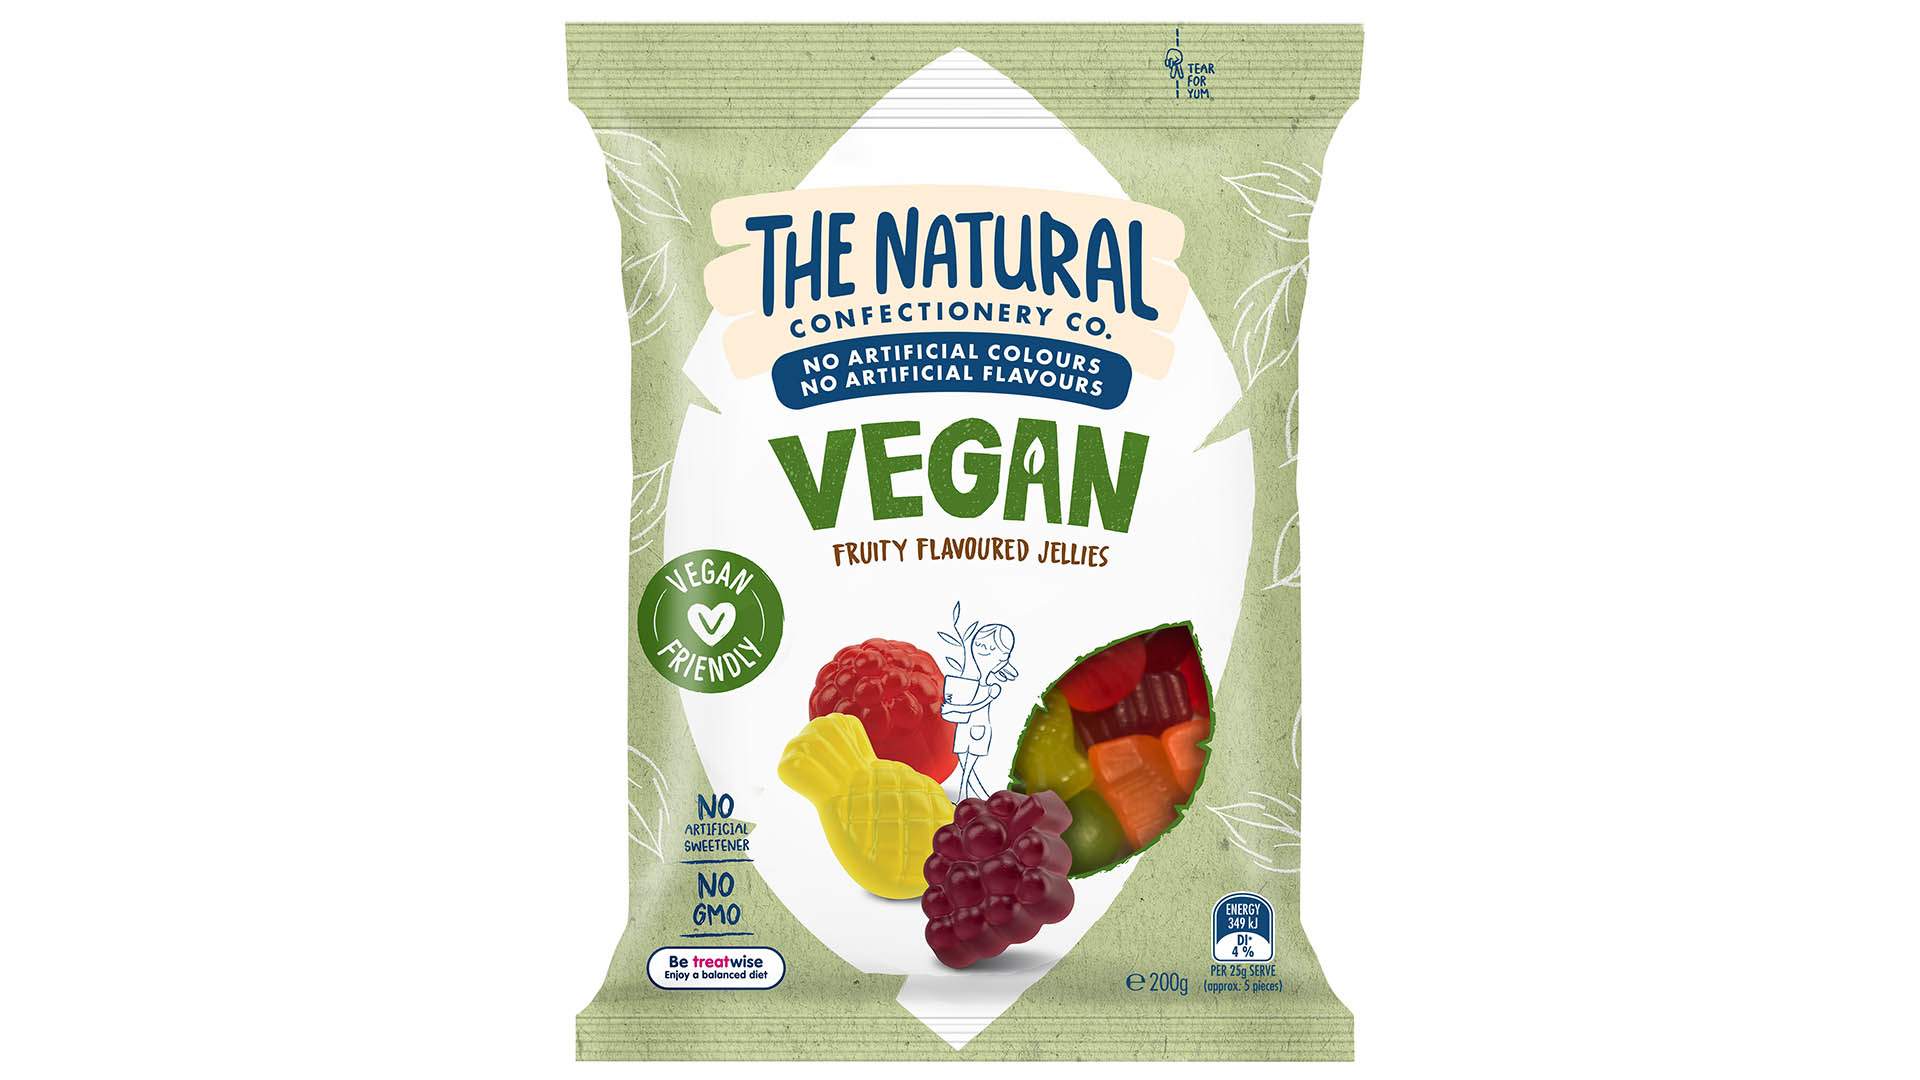 The Natural Confectionery Co Is Releasing a Vegan Version of Its Fruit-Flavoured Lollies